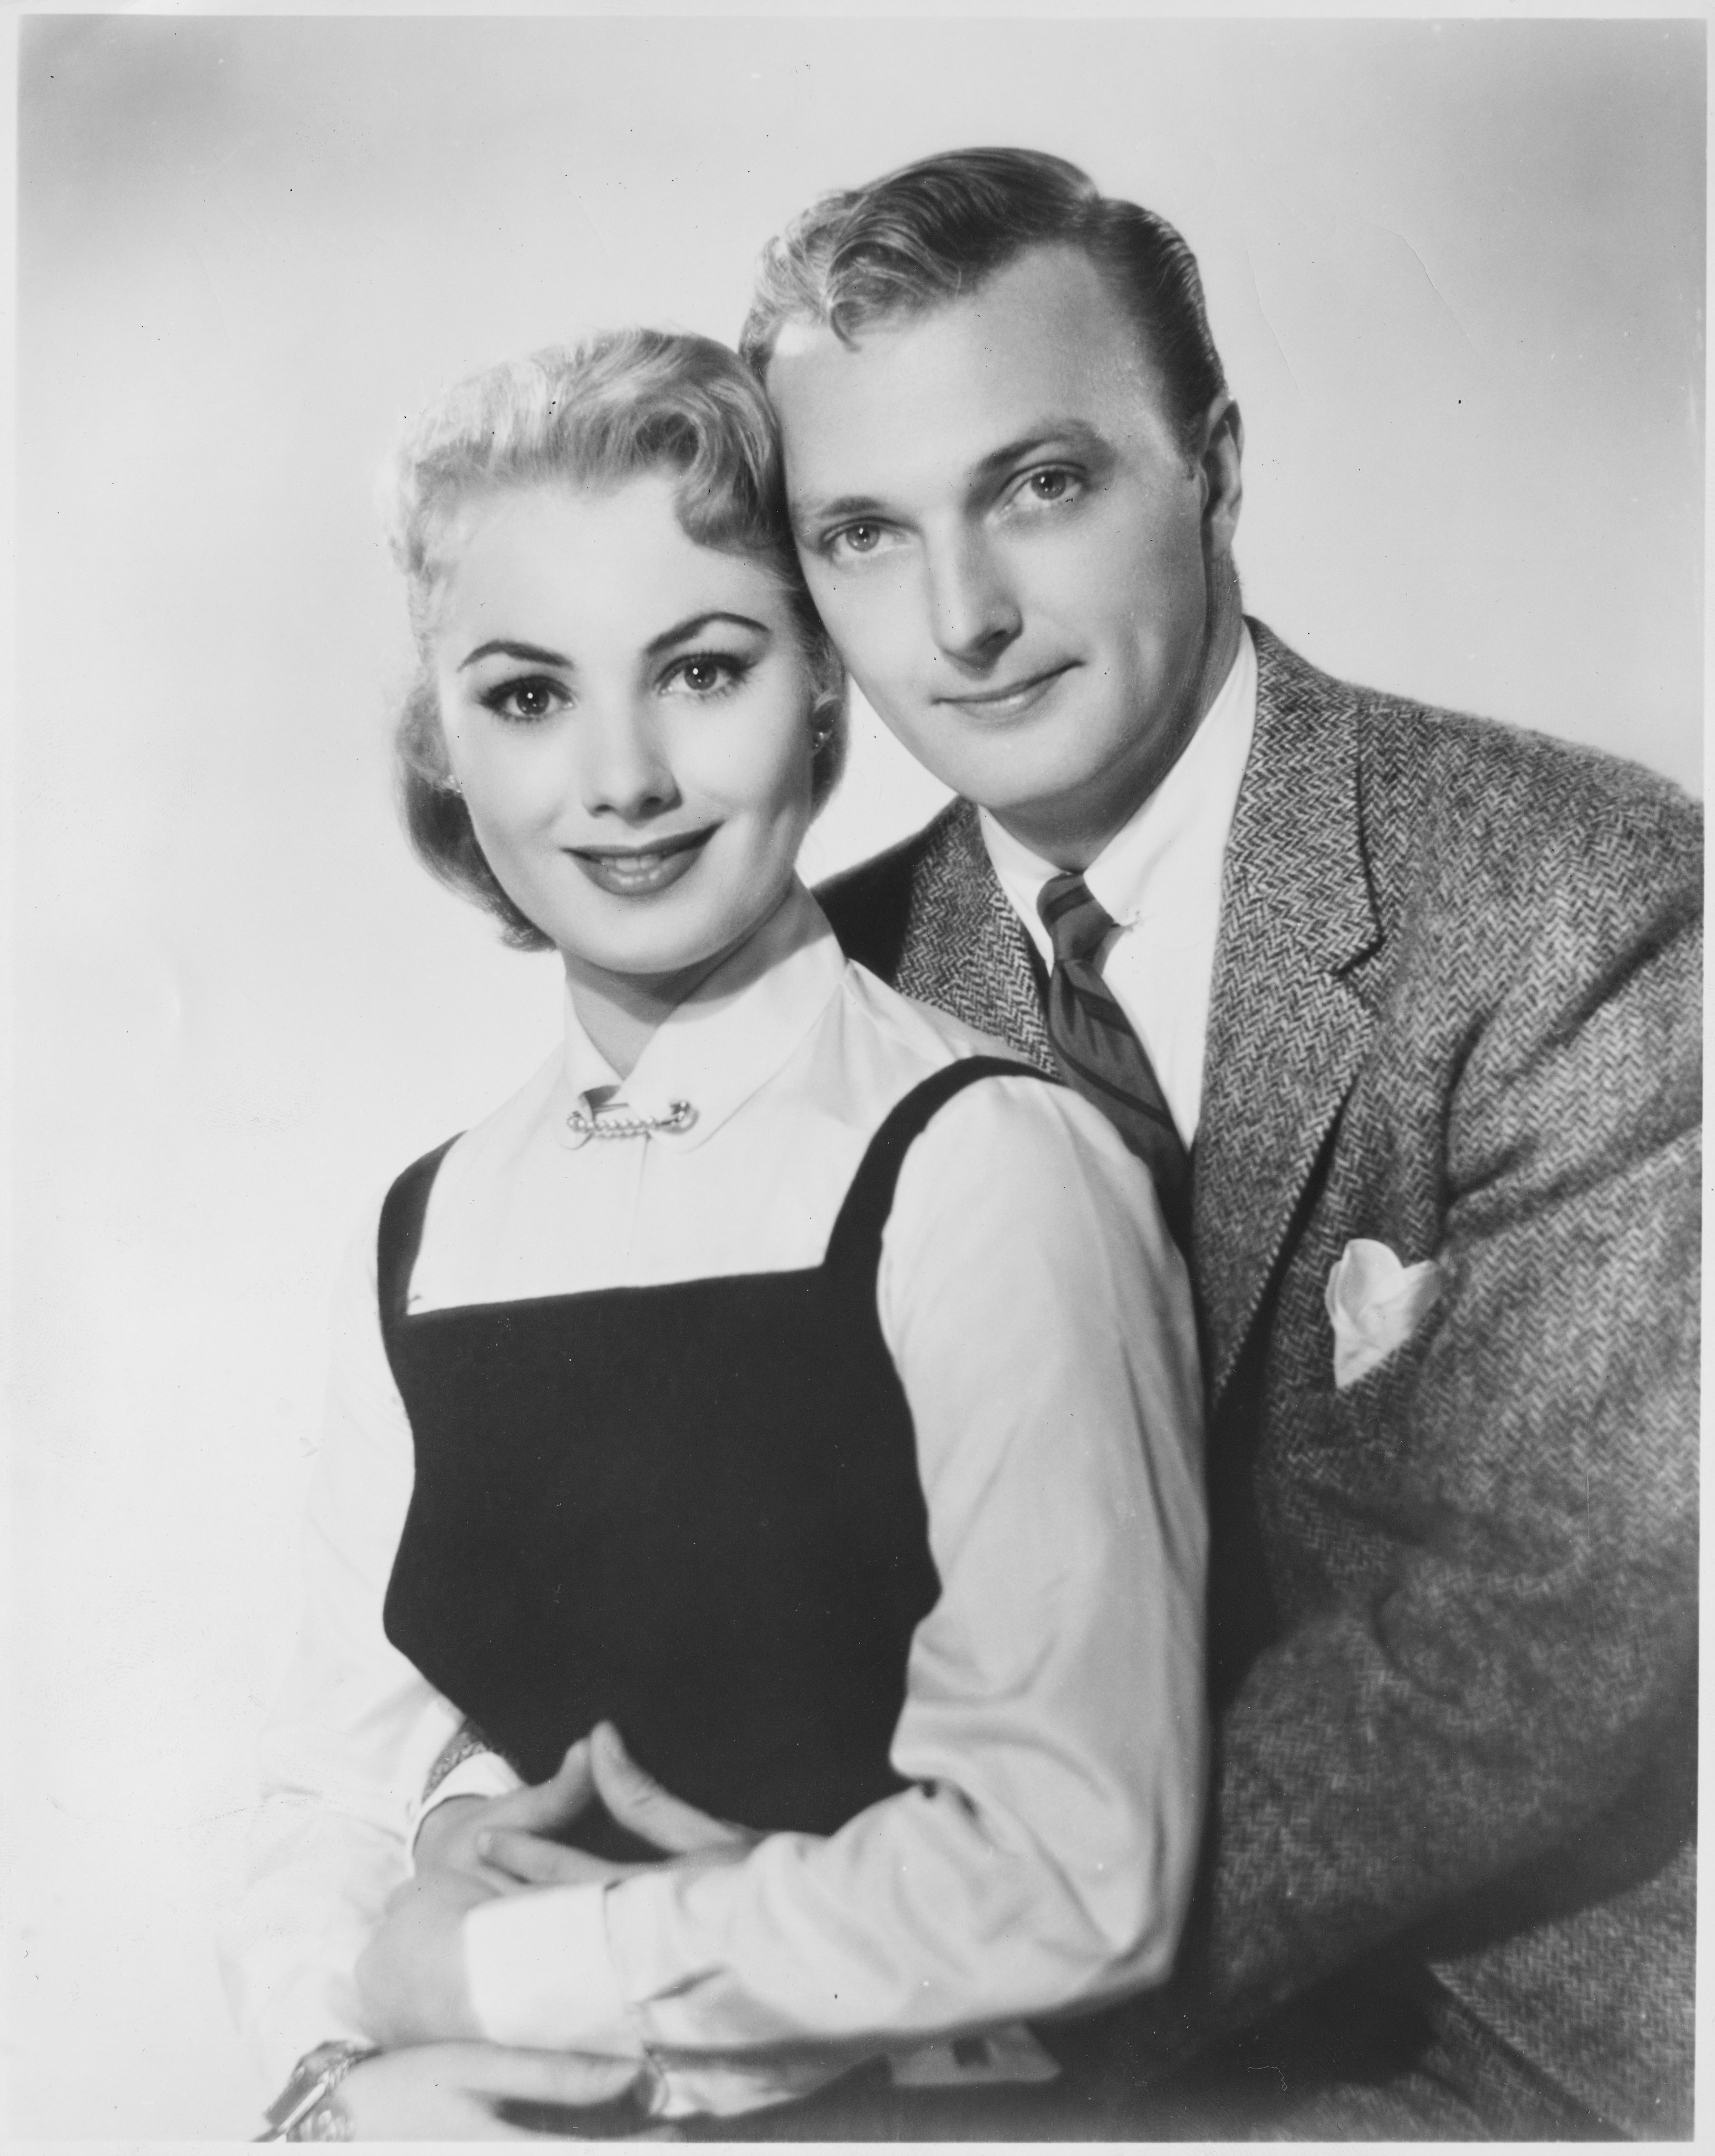 Actors Shirley Jones and Jack Cassidy pictured on January 1, 1950 ┃Source: Getty Images